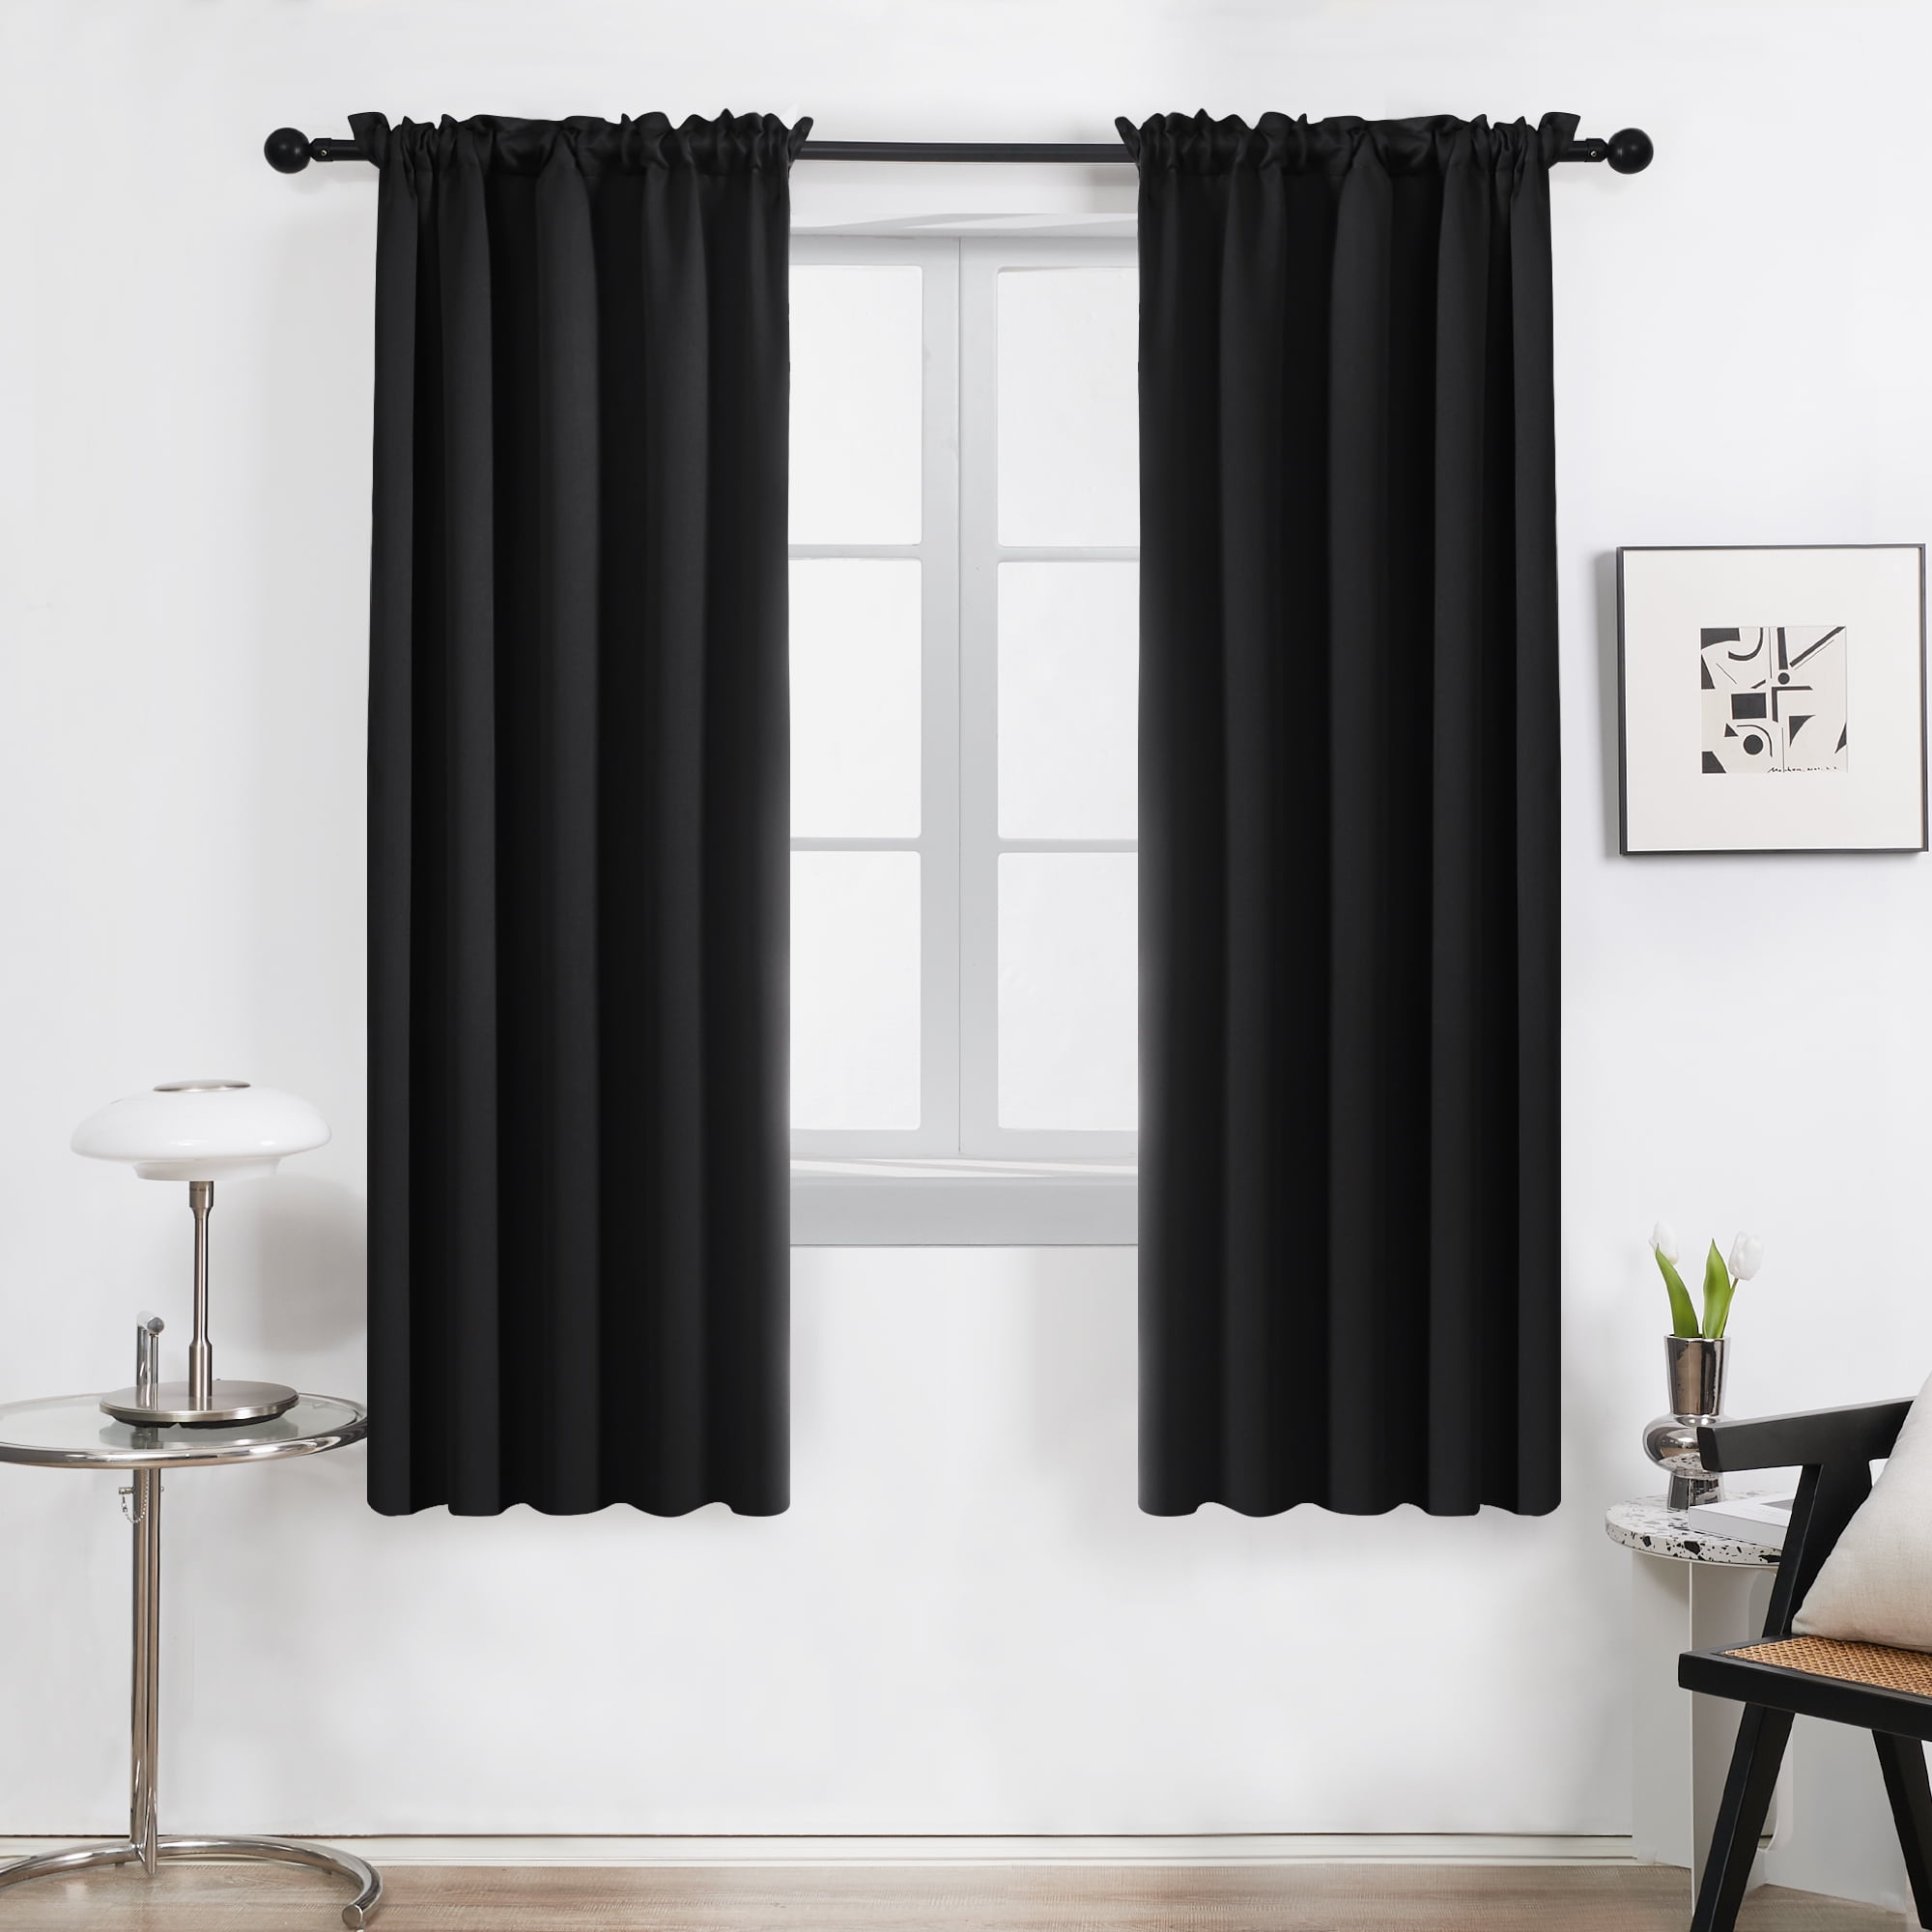 Deconovo Black Blackout Curtains Thermal Insulated Rod Pocket Curtain Panels for Bedroom 42 W x 63 L Black 1 Panel 